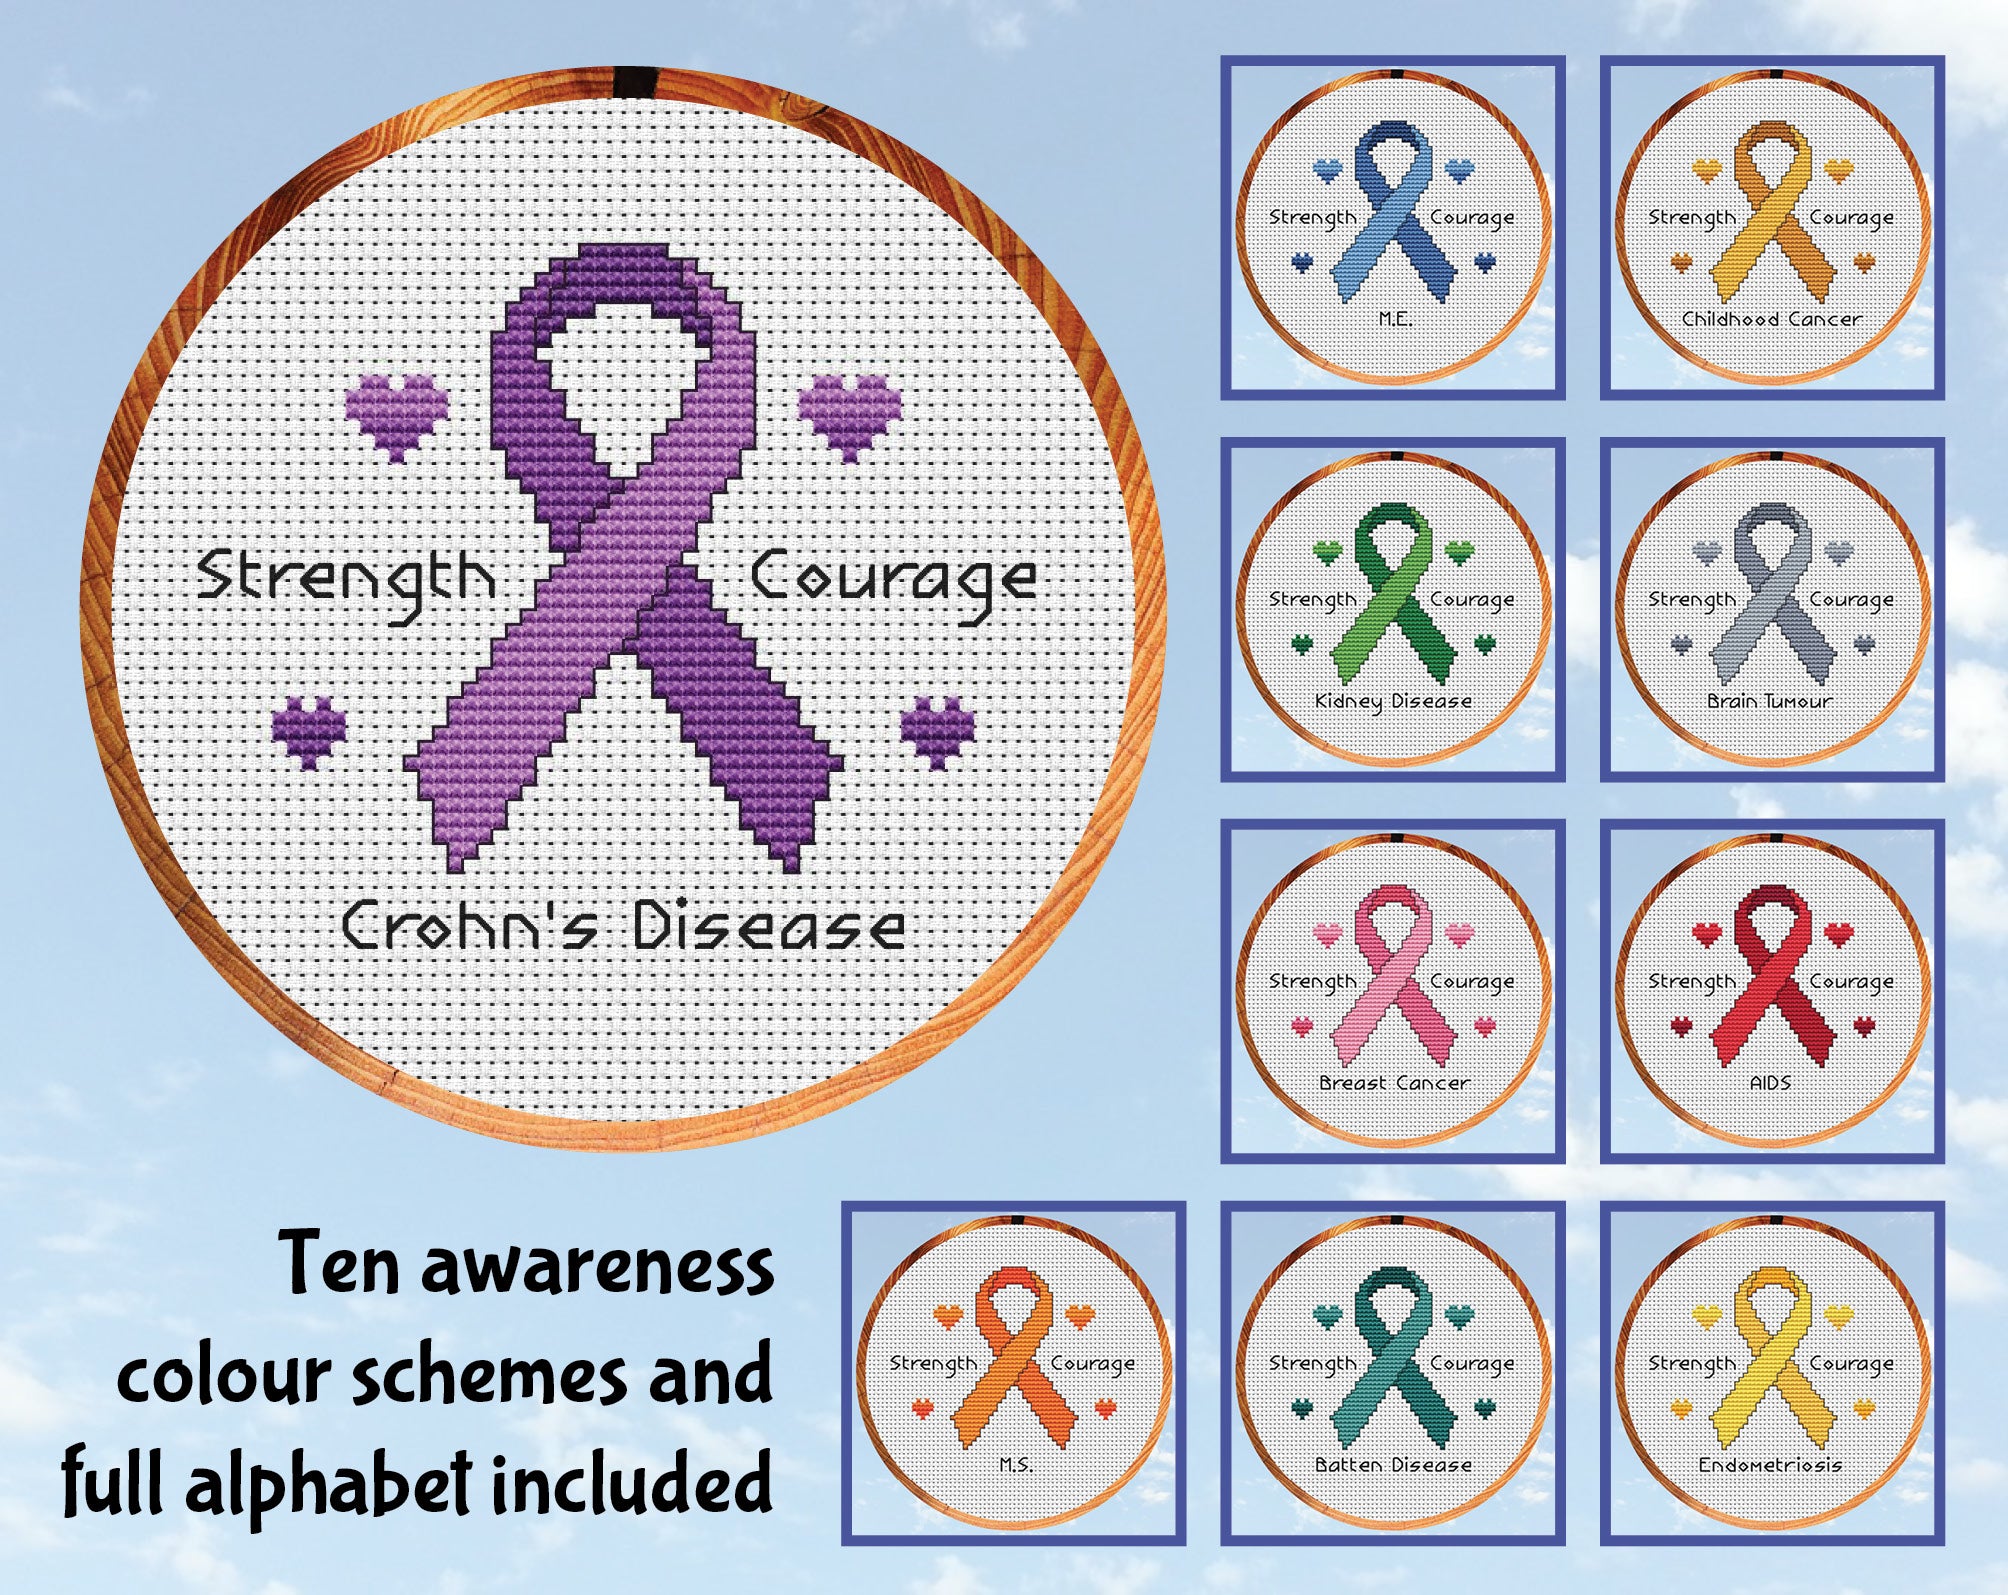 Free awareness ribbon cross stitch pattern. Awareness ribbon with the words Strength and Courage and an illness or disability underneath. Ten awareness colour scheems and full alphabet included.